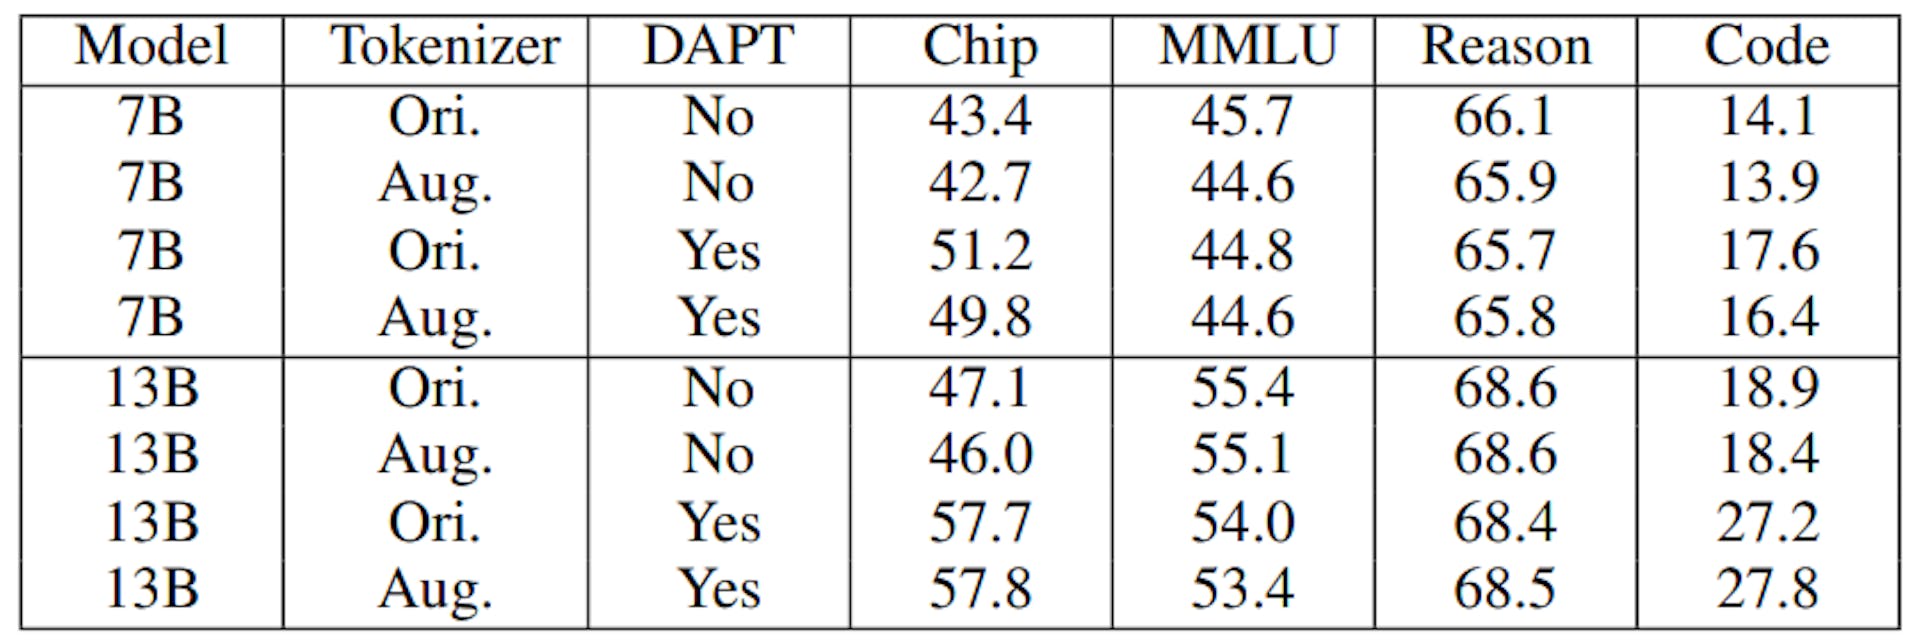 TABLE IX: Evaluation Results on ChipNeMo models with Different Tokenizers. Aug. indicate augmented tokenizer and Ori. indicate using LLaMA2 original tokenizer. Using augmented tokenizer without DAPT corresponds to the model initialization as in Section III-A.